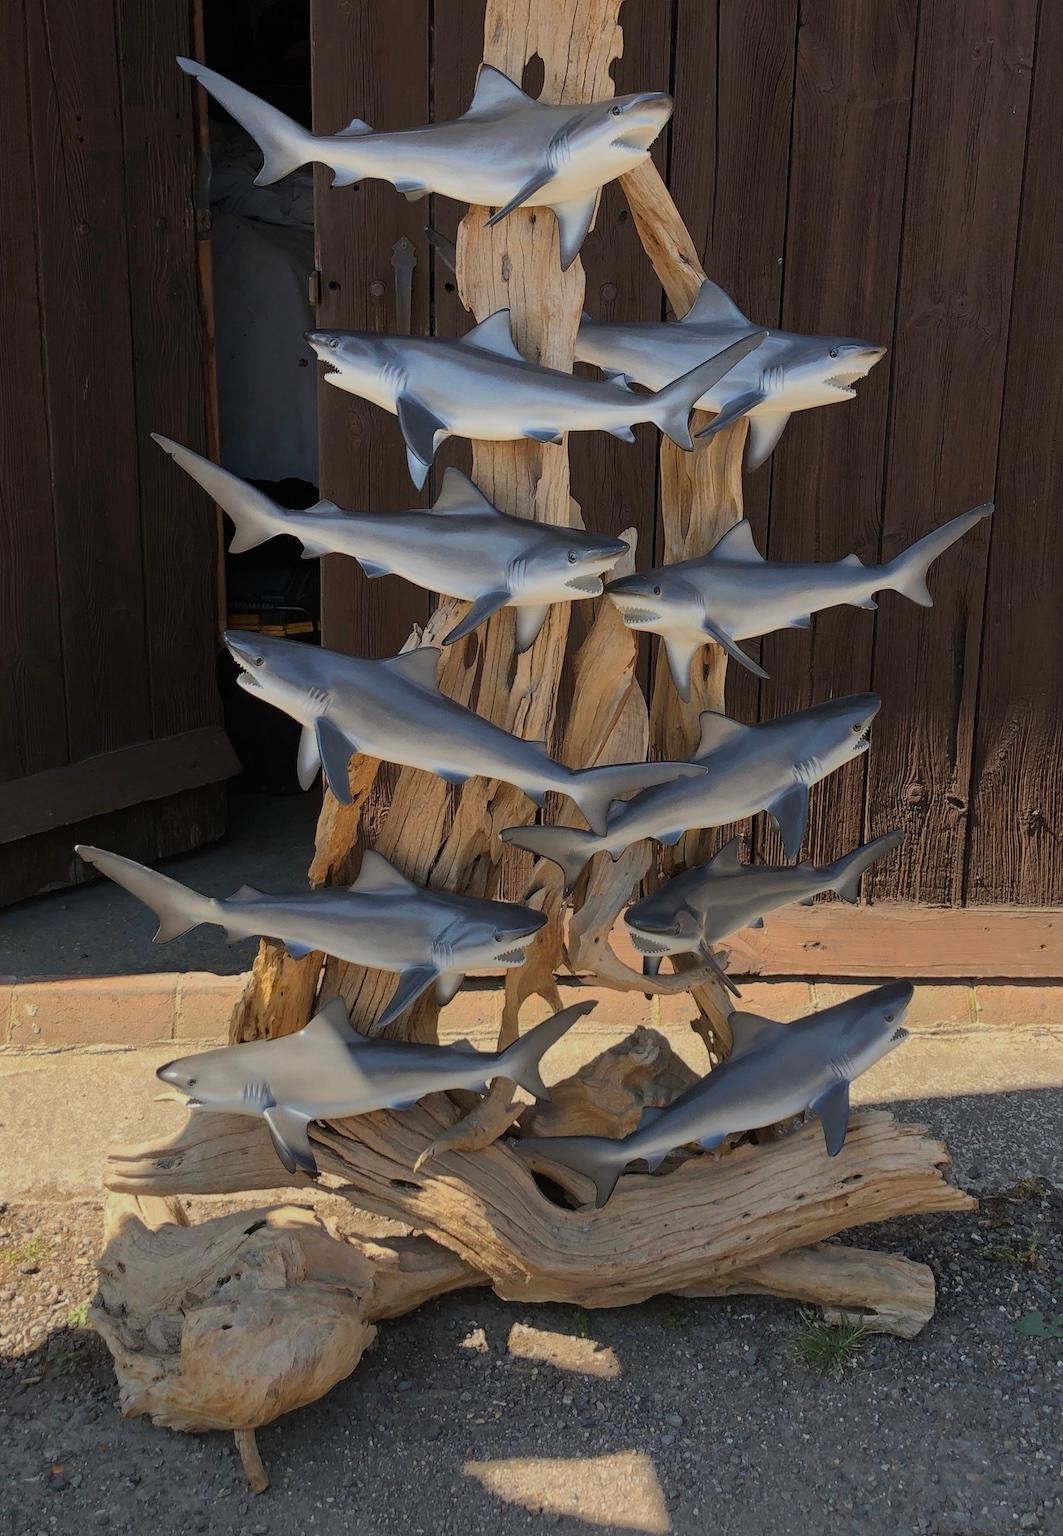 Mid-Century Modern Large solid floor standing wooden trunk Lamp embellished with baby sharks, and original shade, 
circa 1960s, Originated in the US.

This amazing and rare artisan made lamp, is embellished with 8 fibreglass sharks on a wooden